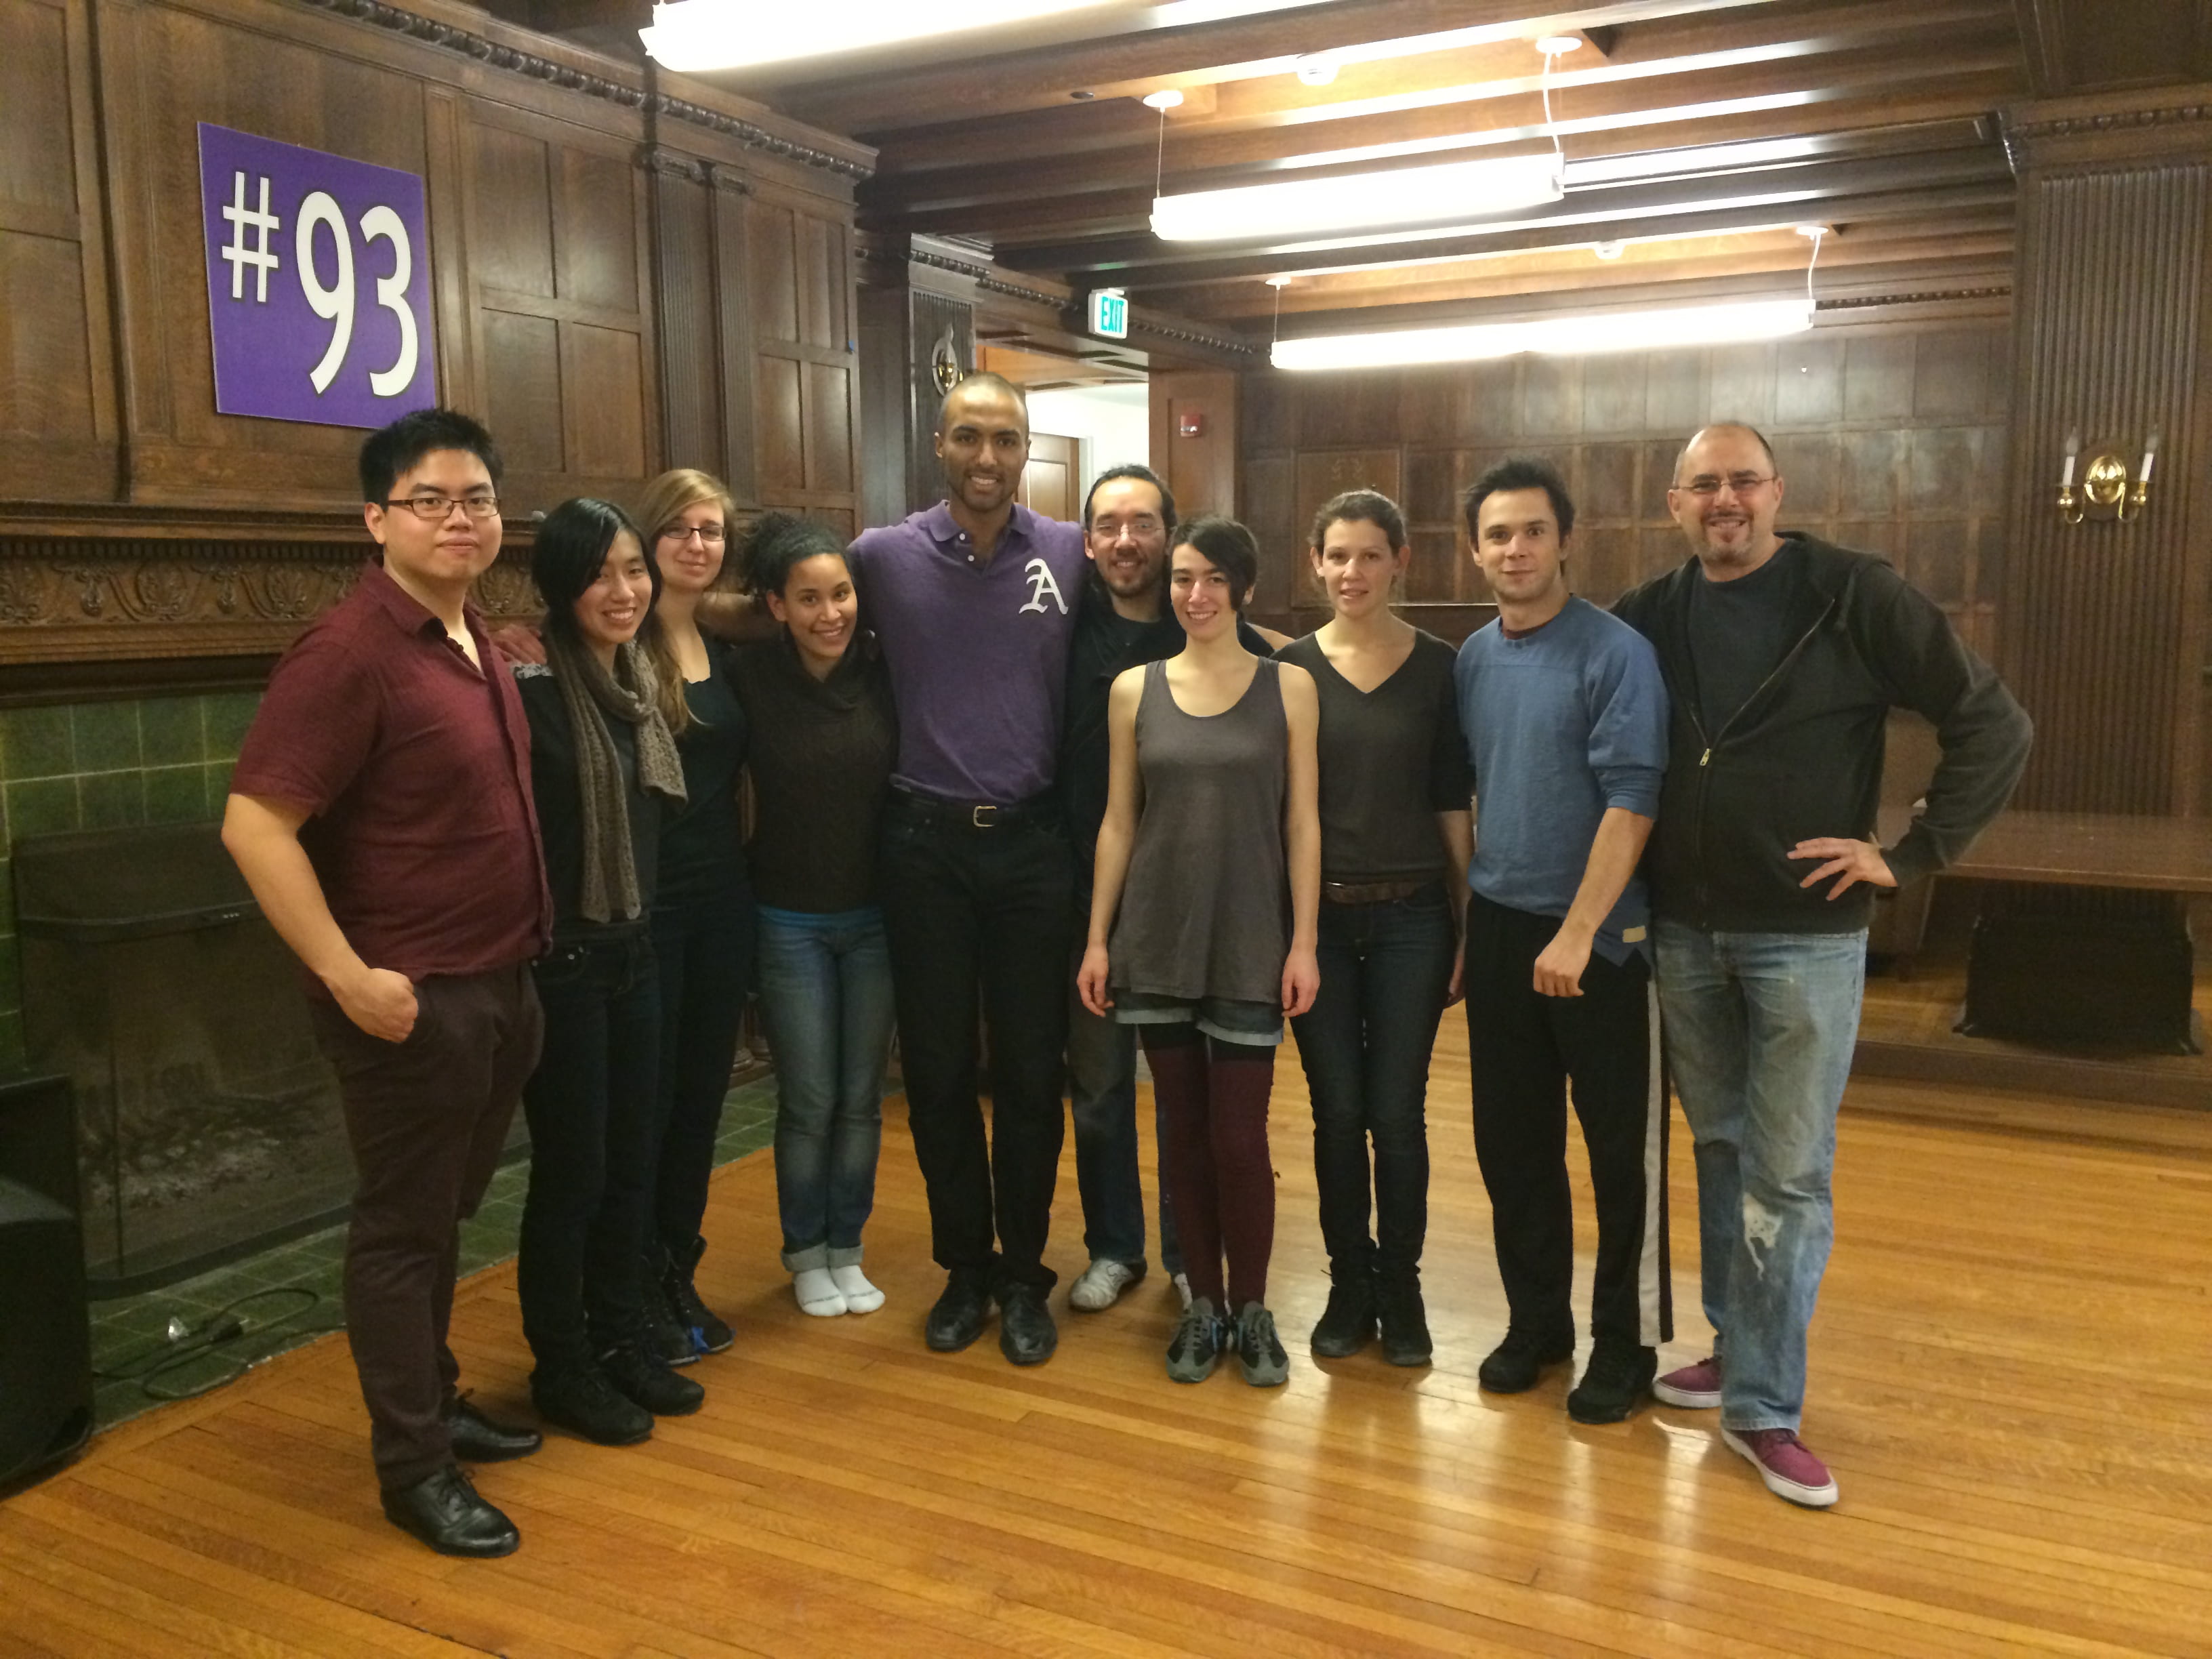 Club photo of Amherst Argentine Tango club. 10 people stand in a line facing the camera.